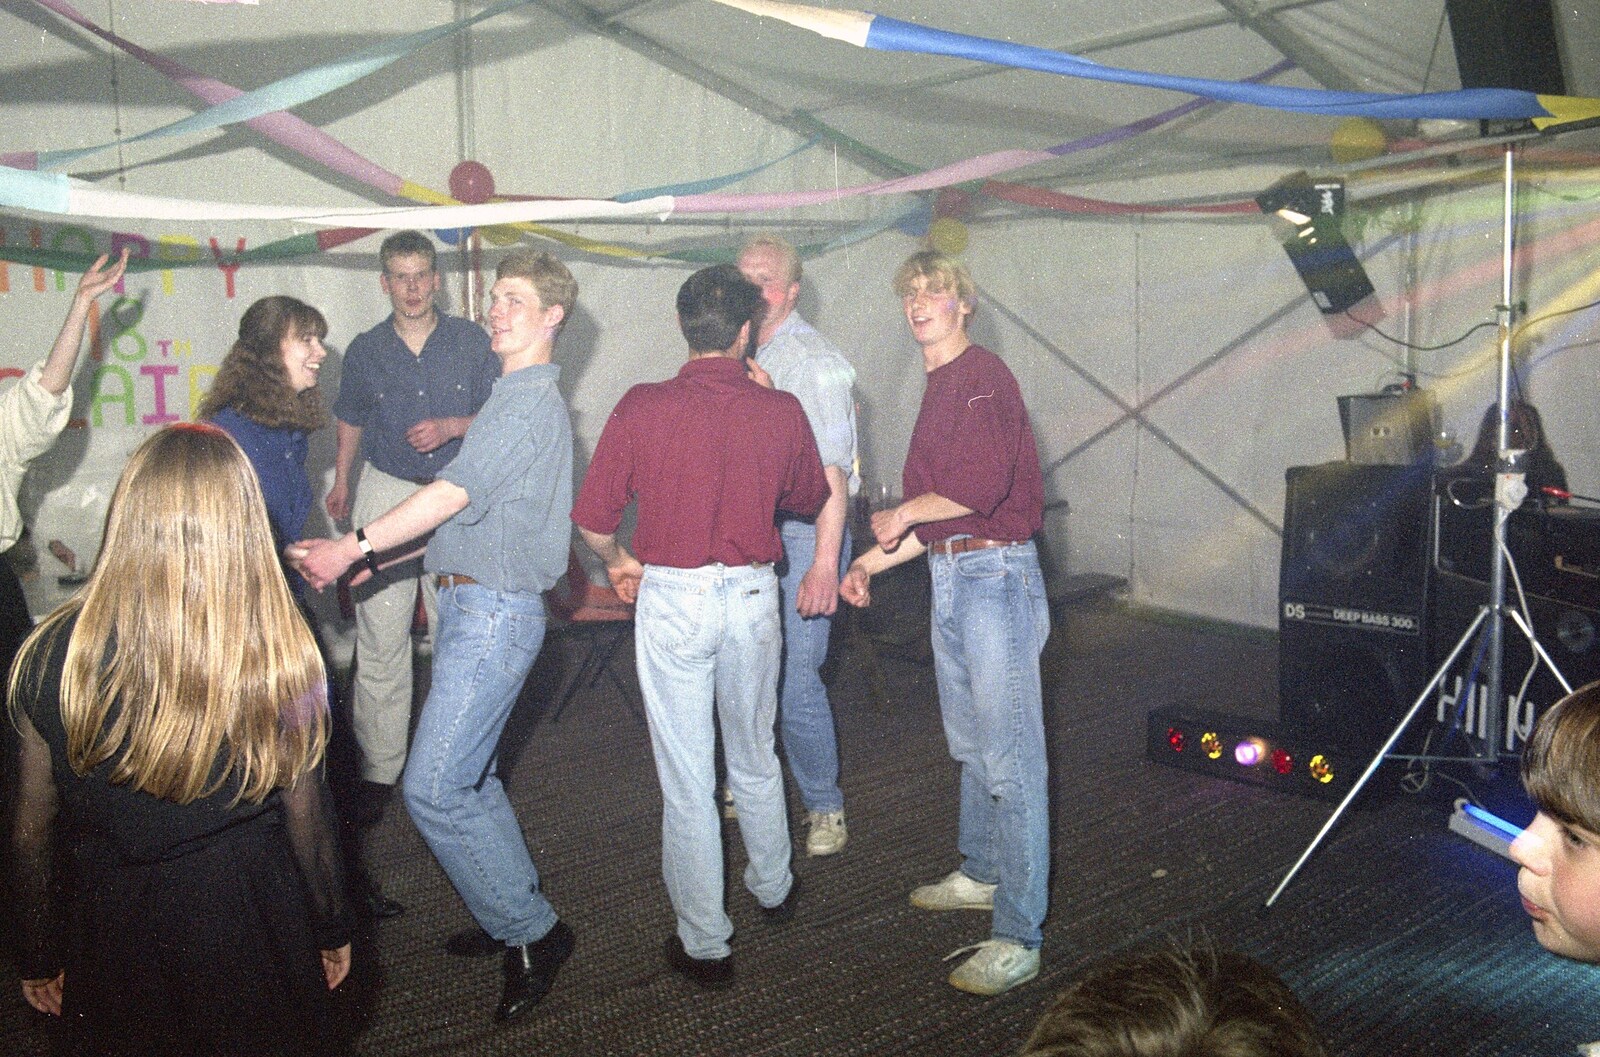 More mad dancing from the boys from Claire's Eighteenth Birthday, The Swan Inn, Brome, Suffolk - 11th June 1994